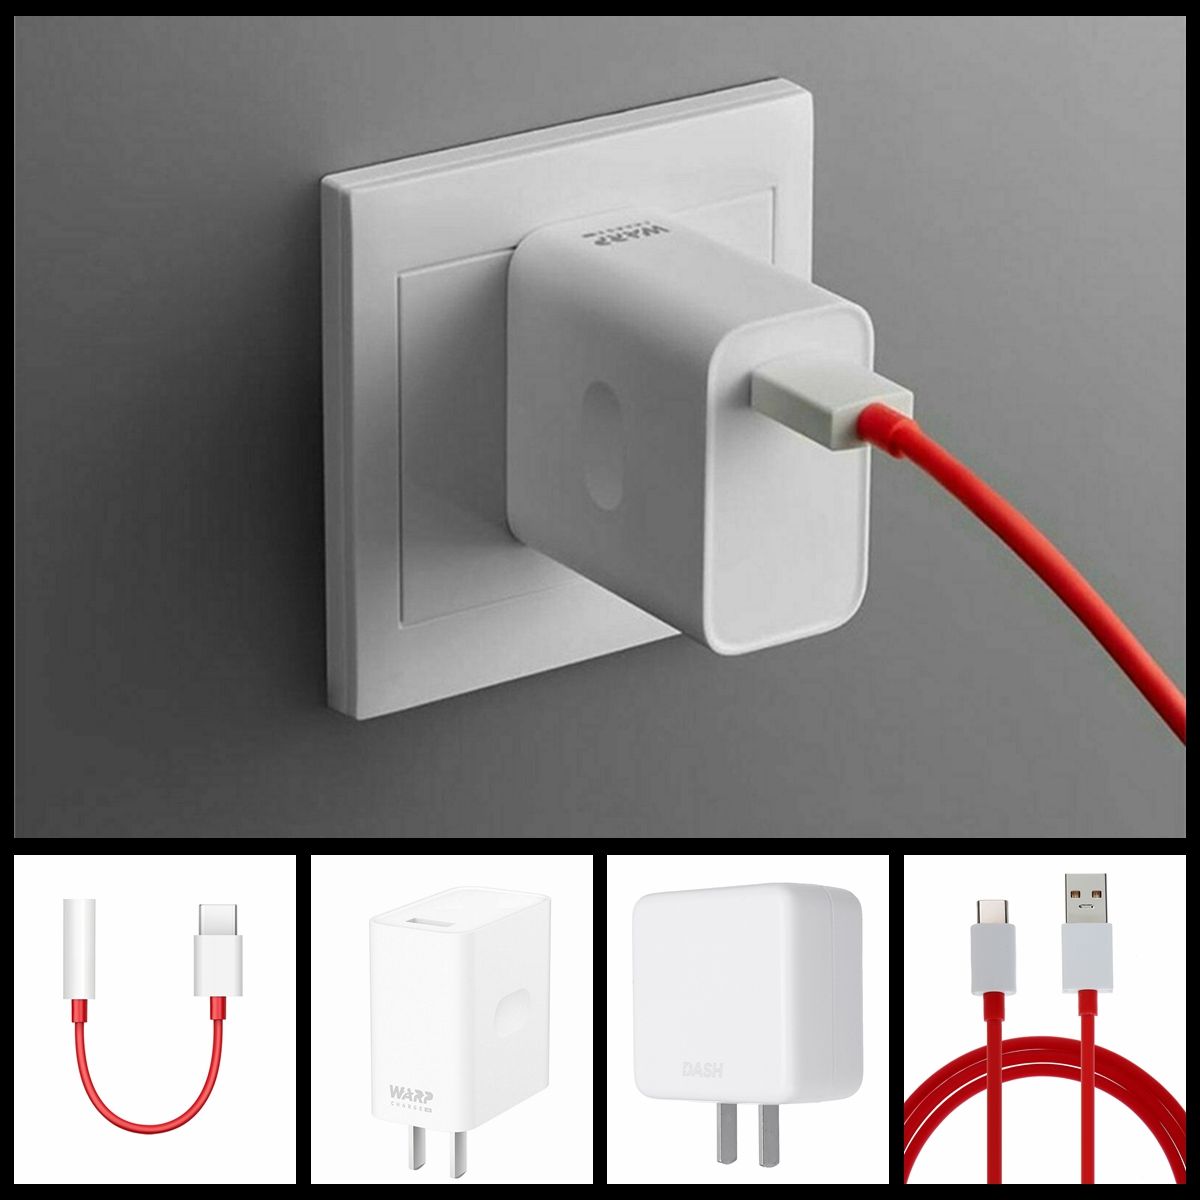 OnePlus-77t-pro-Warp-Charger-30W-Power-Adapter-Charge-Type-C-Flat-Data-Cable-1606251